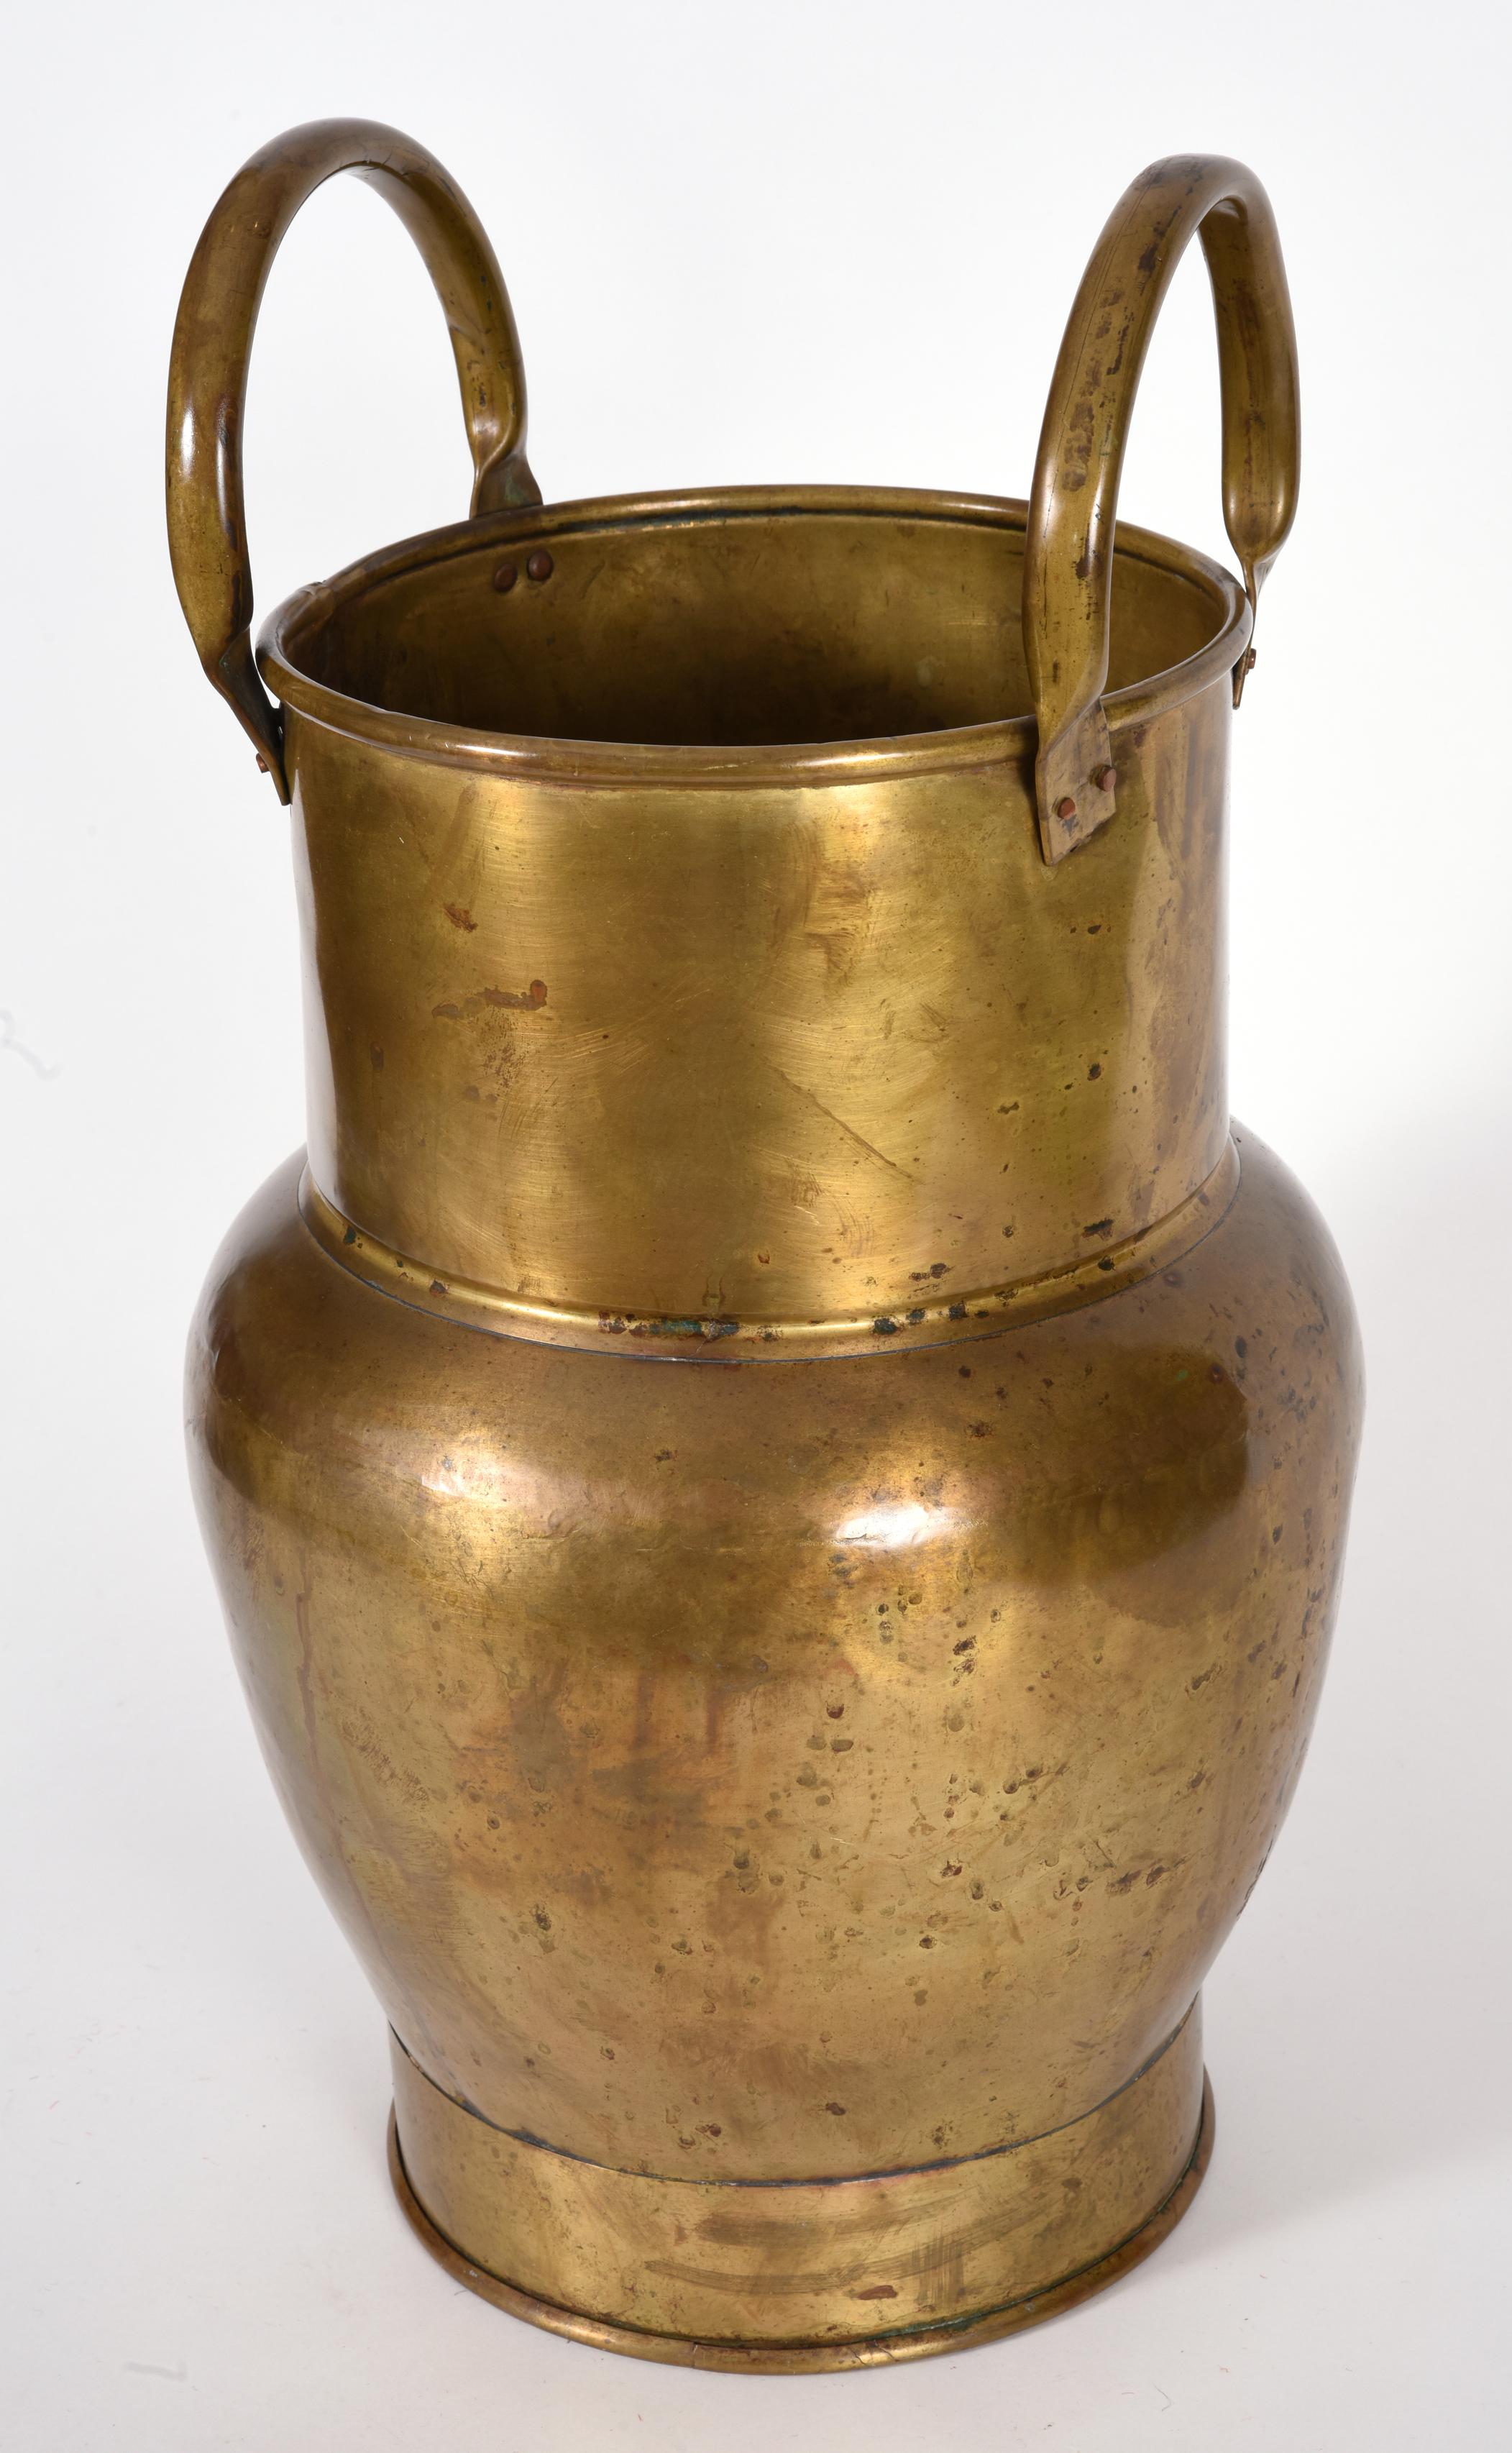 Mid-20th century indoor / outdoor brass umbrella stand or cane stand with two side handles. The umbrella stand is in good used condition. The umbrella stand measure about 19.5 inches high x 10.5 body diameter x 8 inches base diameter.